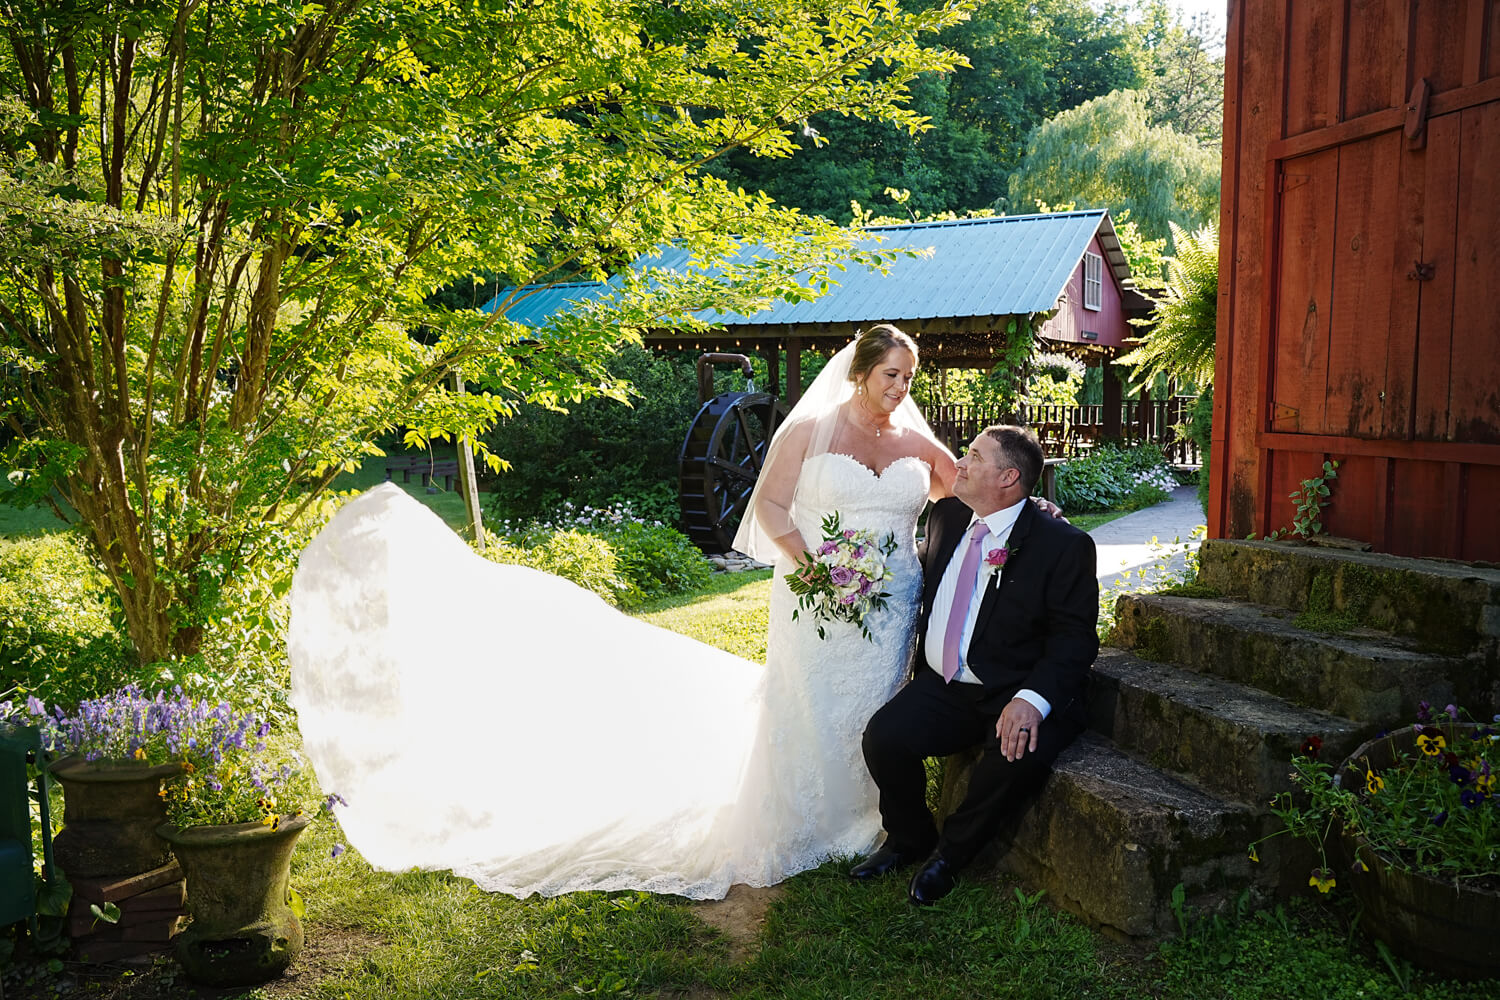 bride's train blowing in the wind behind her as she touches her husband gently at a barn wedding venue in Pigeon Forge